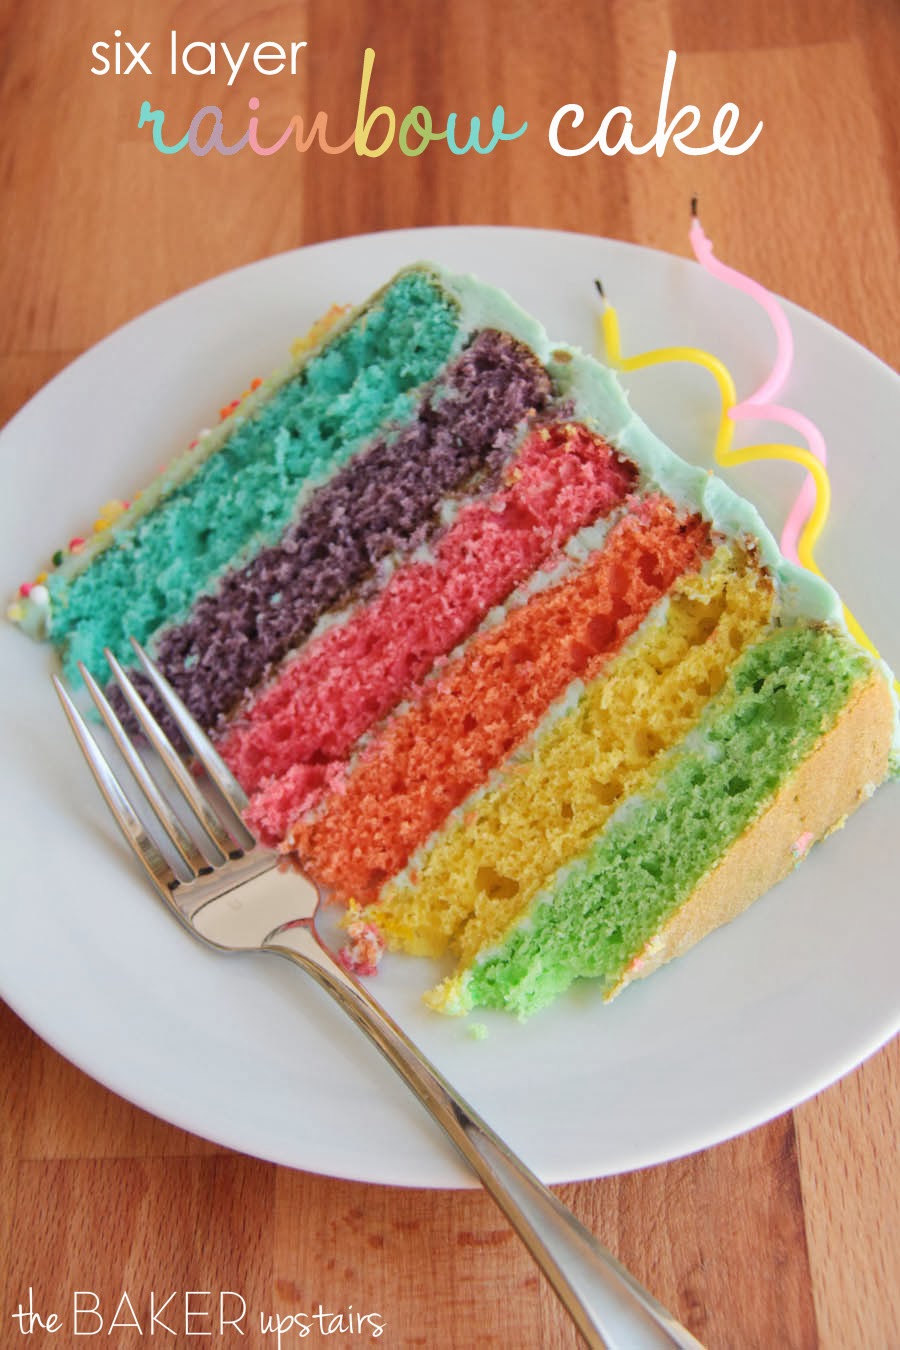 This six layer rainbow cake is colorful way to brighten up your birthday!